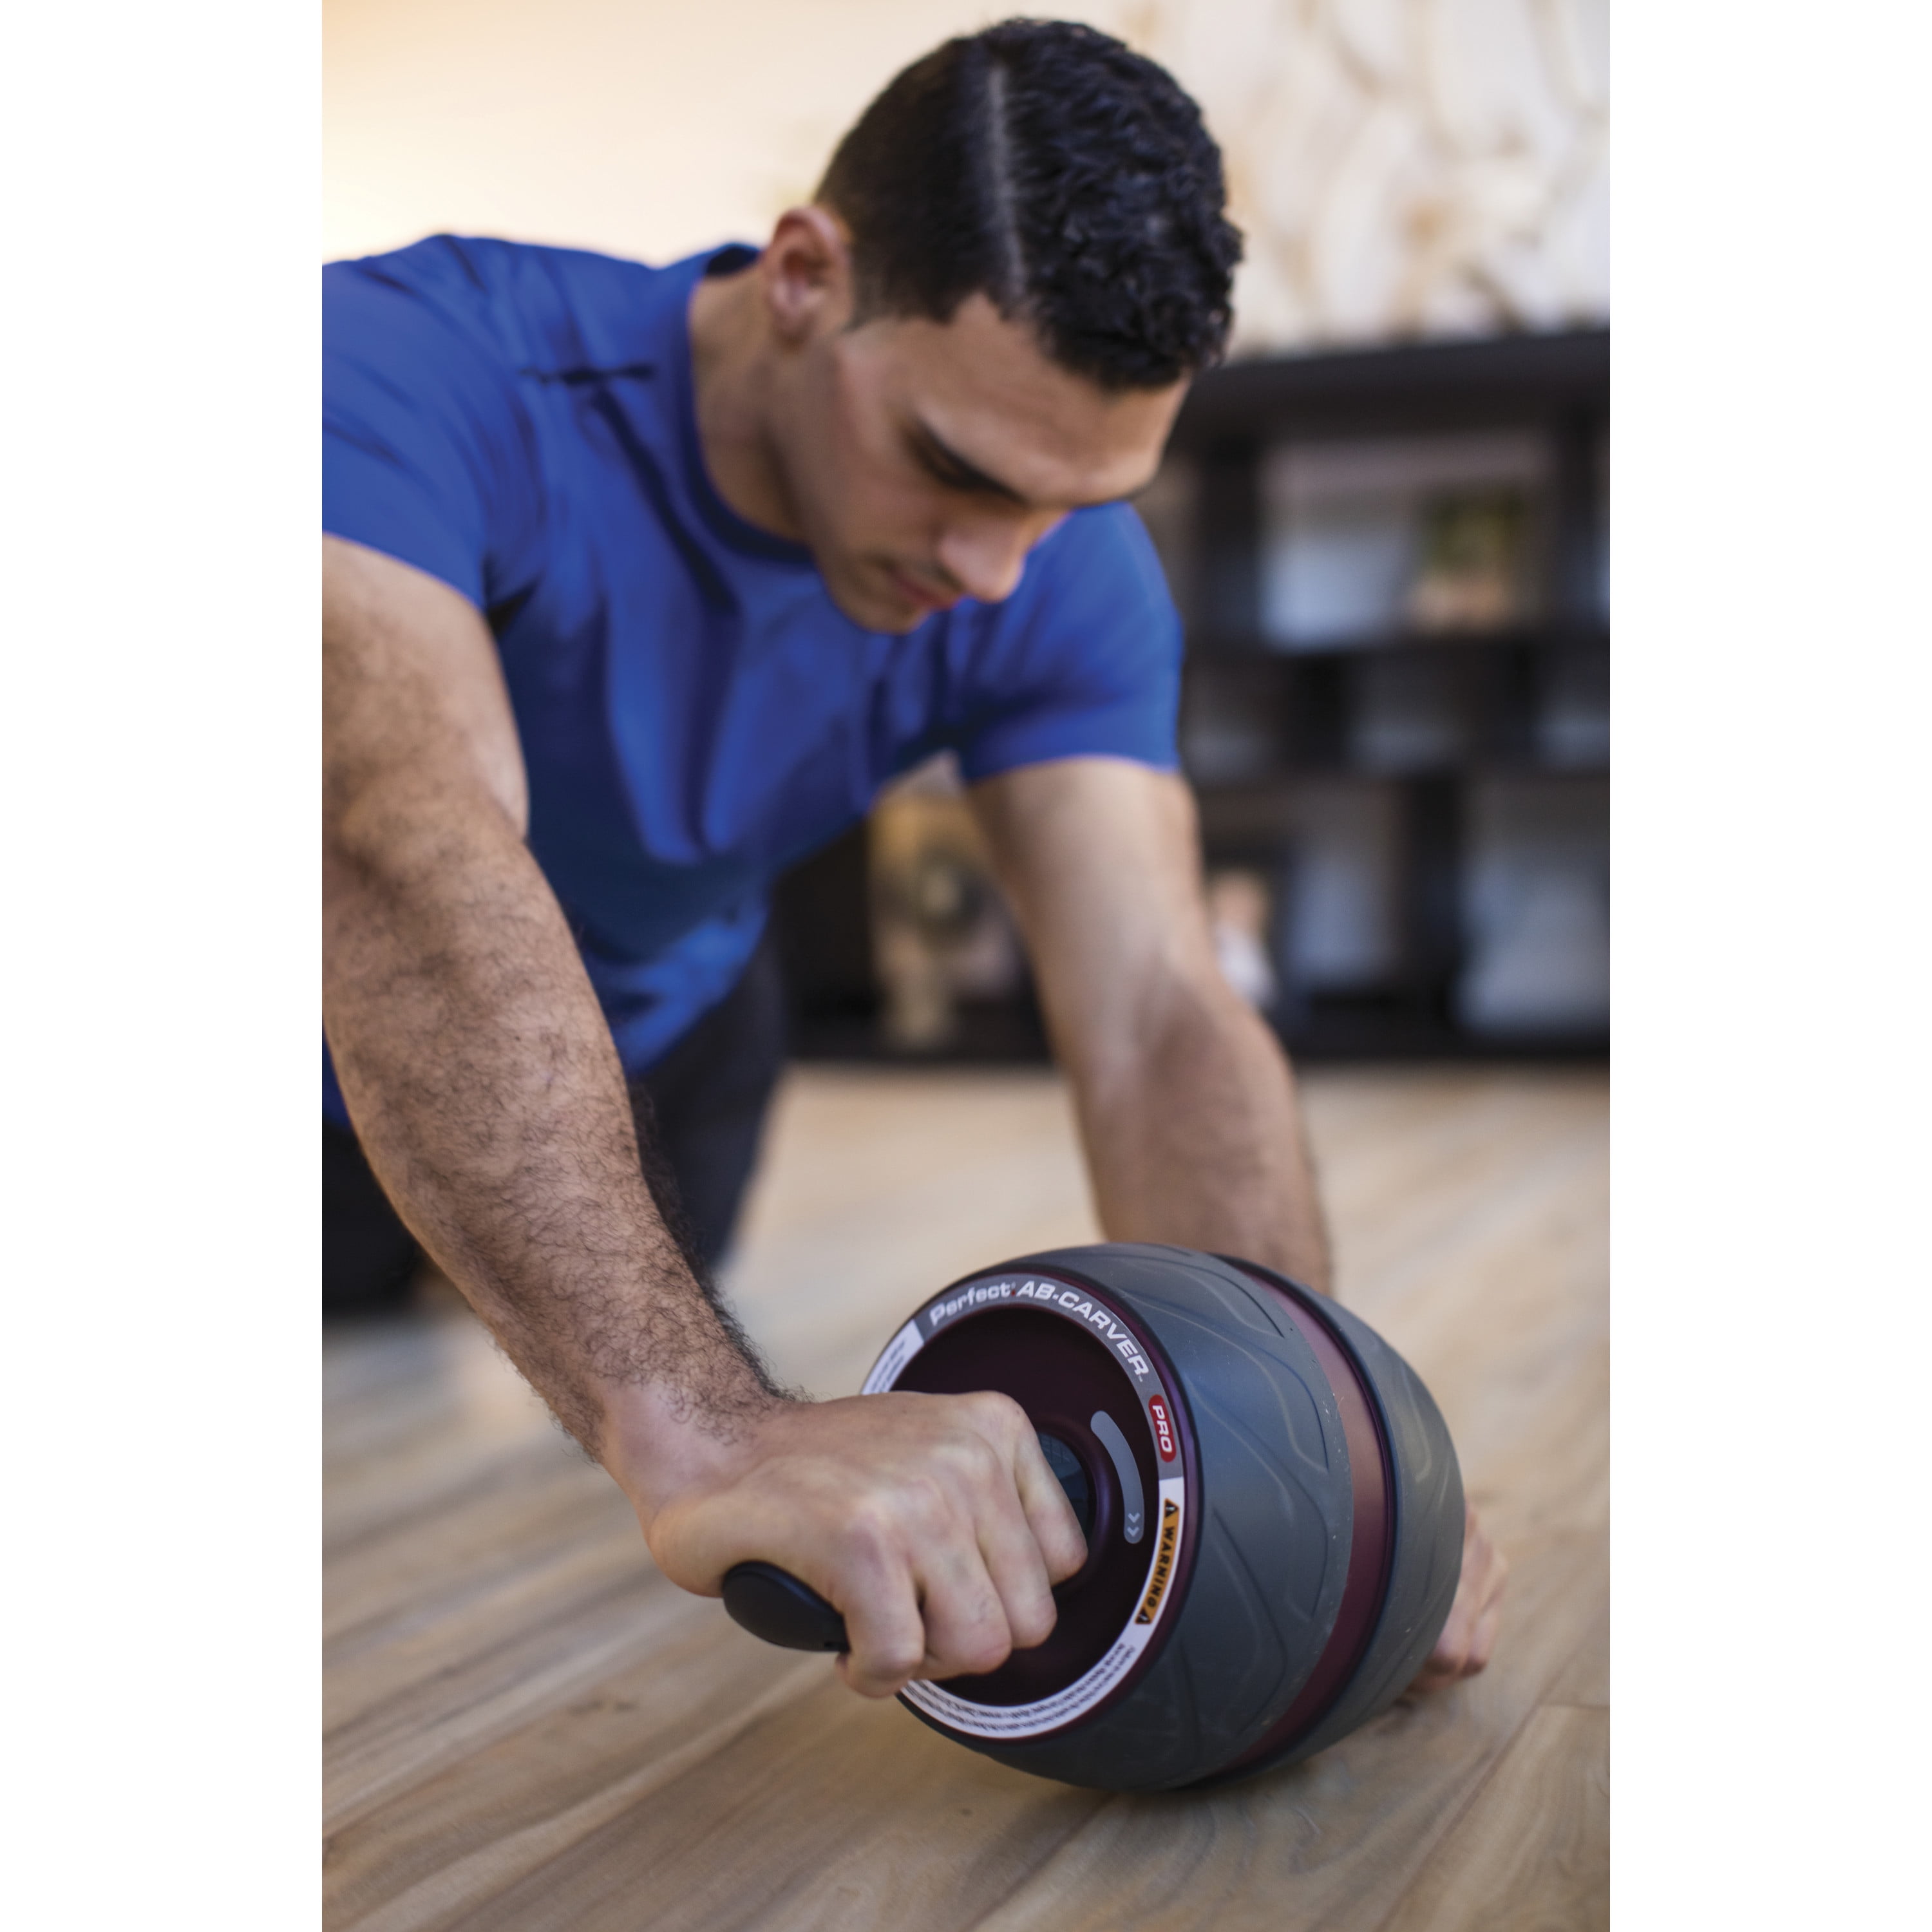 Details about   Pro Ab Roller Wheel Carver Abs Workout with Knee Mat Premium Home Gym Equipment 